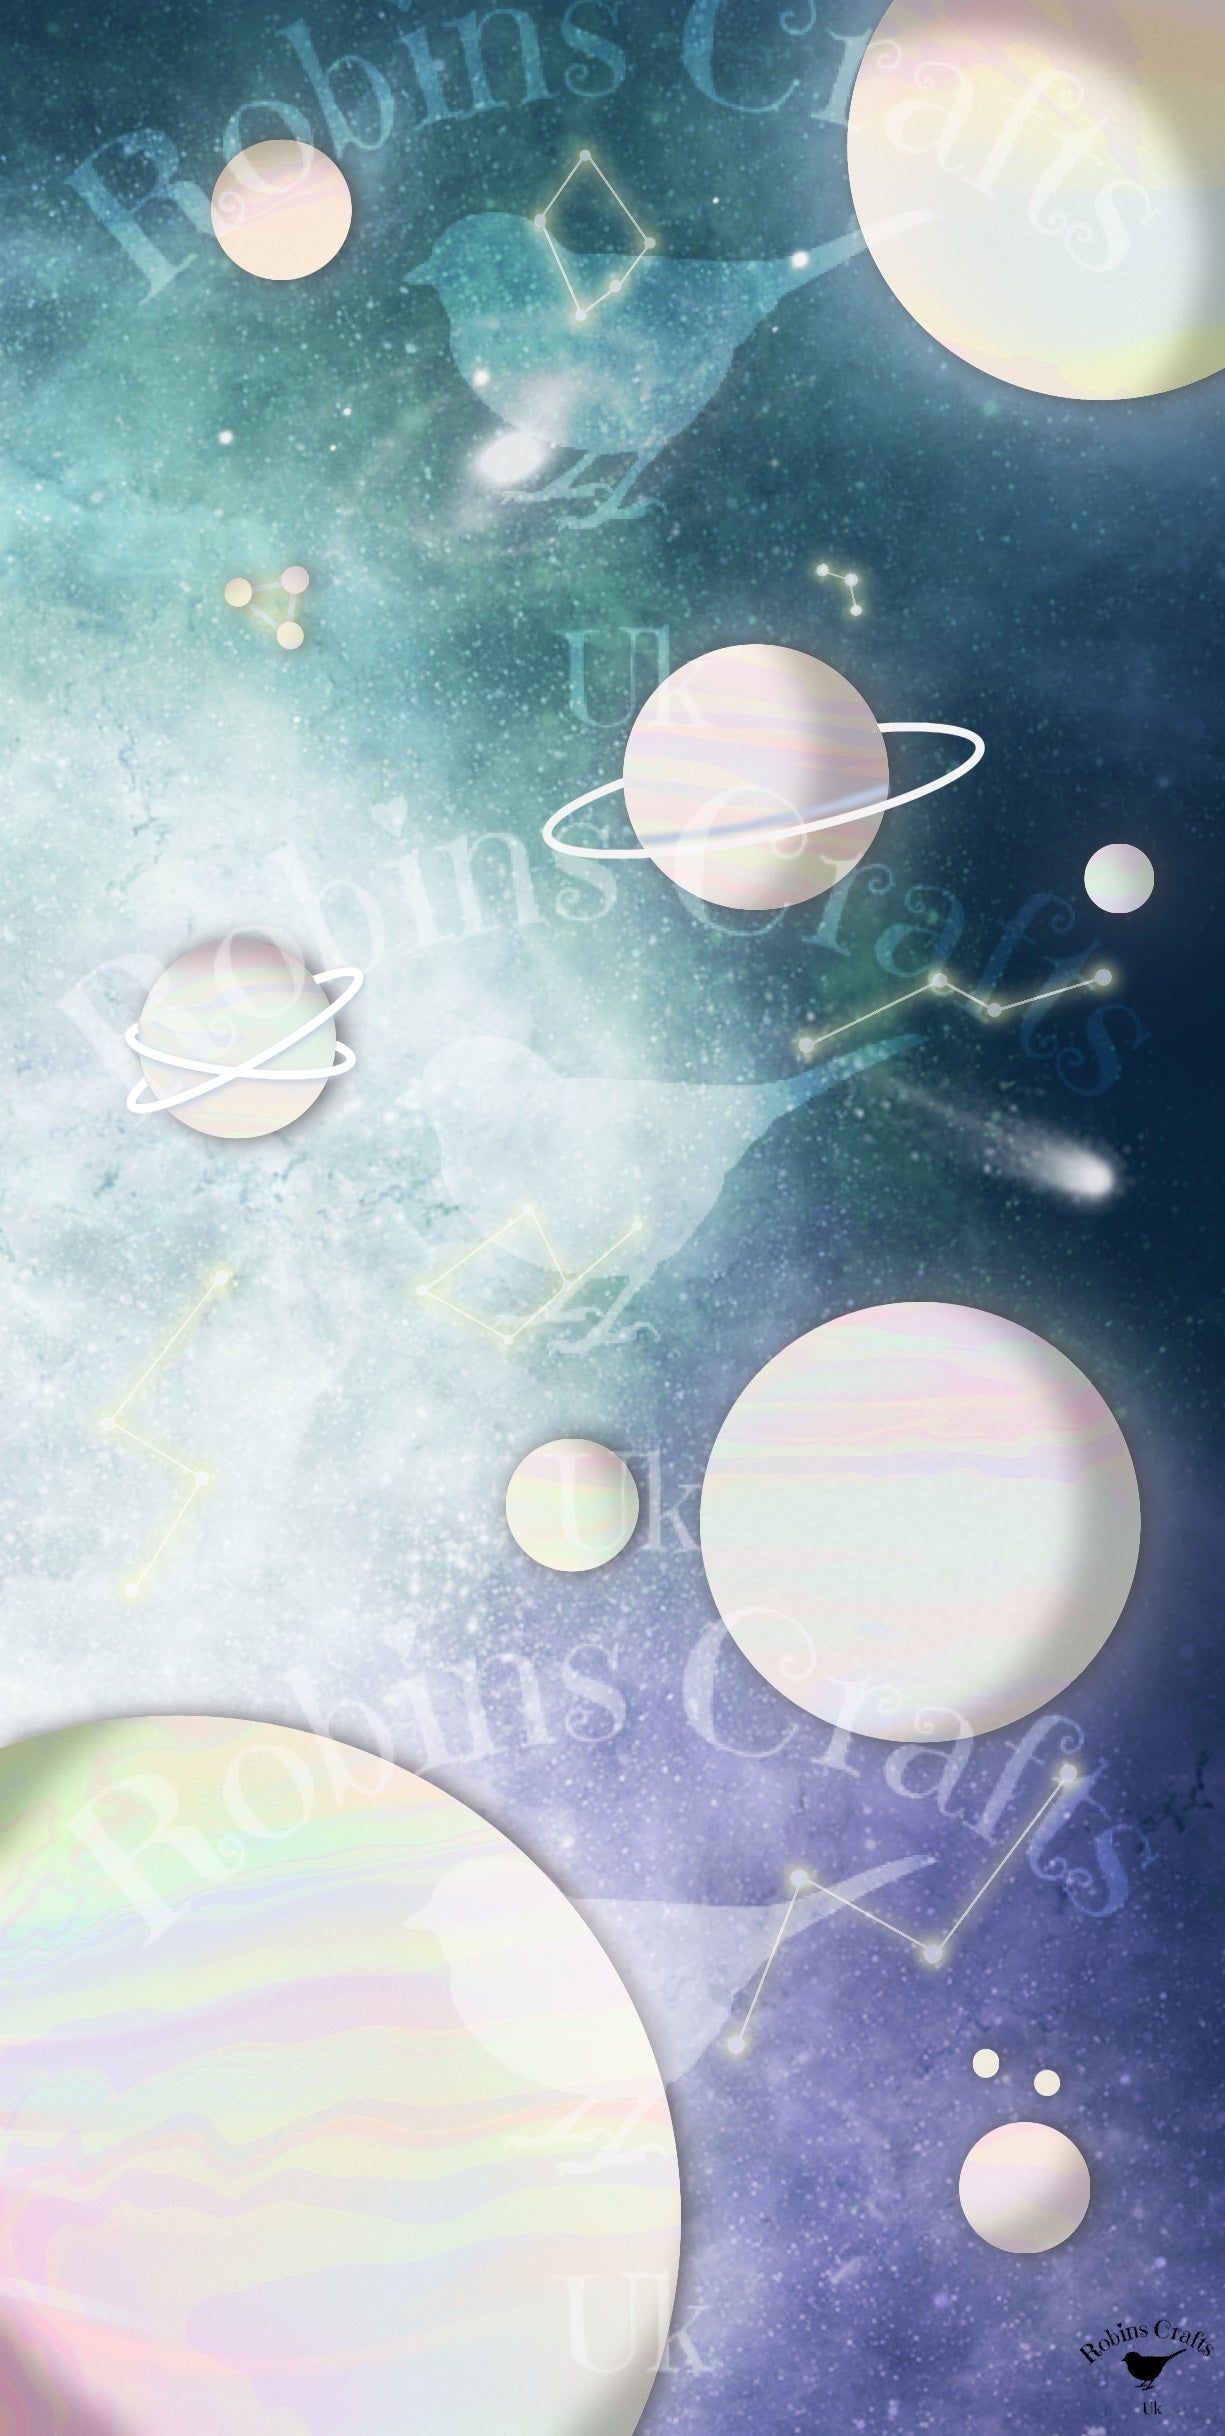 A poster with the planets and stars on it - Kawaii, space, planet